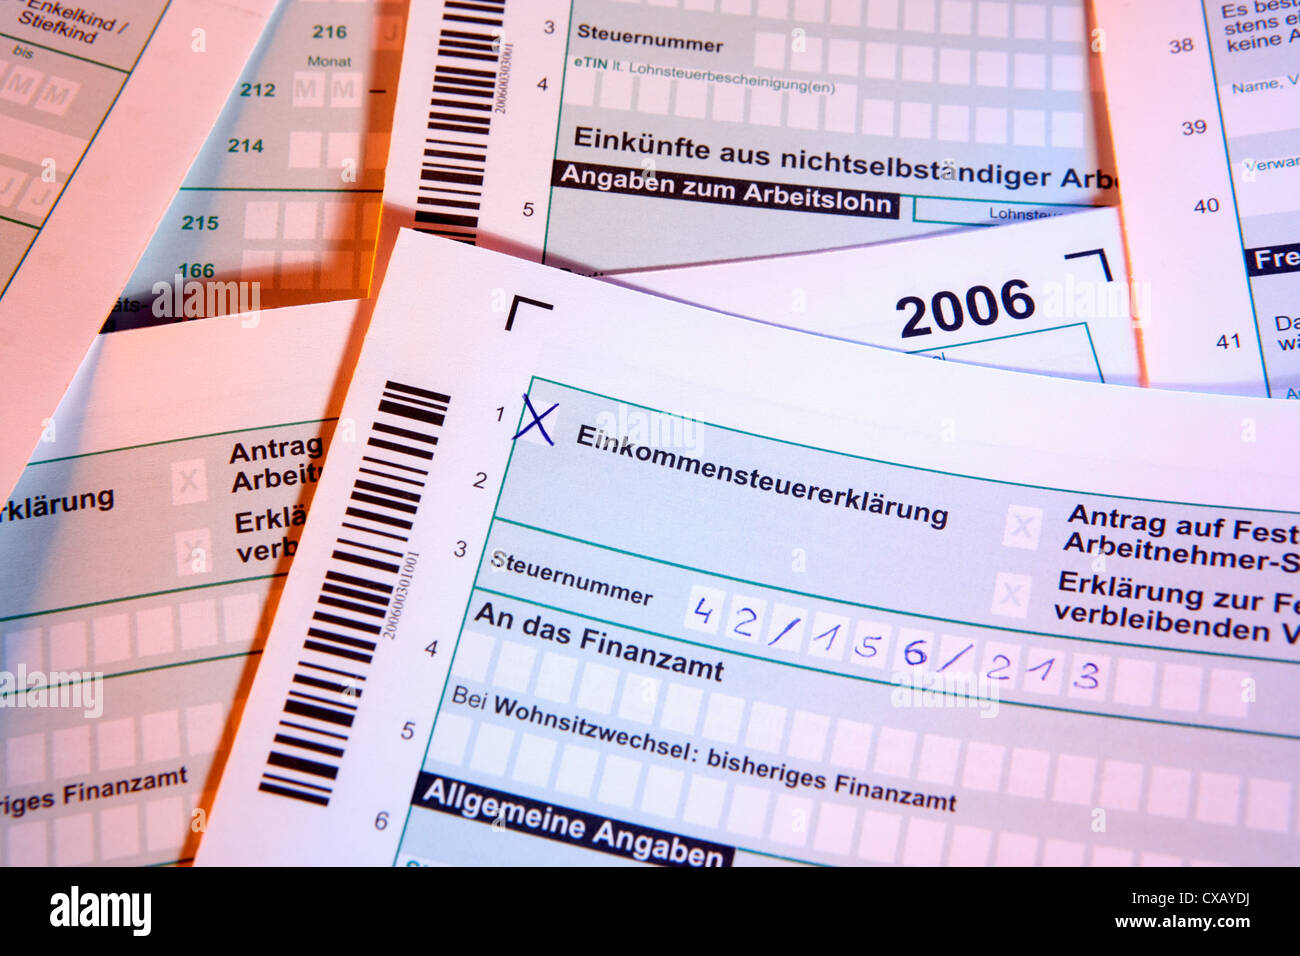 Berlin, forms for income tax return for the year 2006 Stock Photo